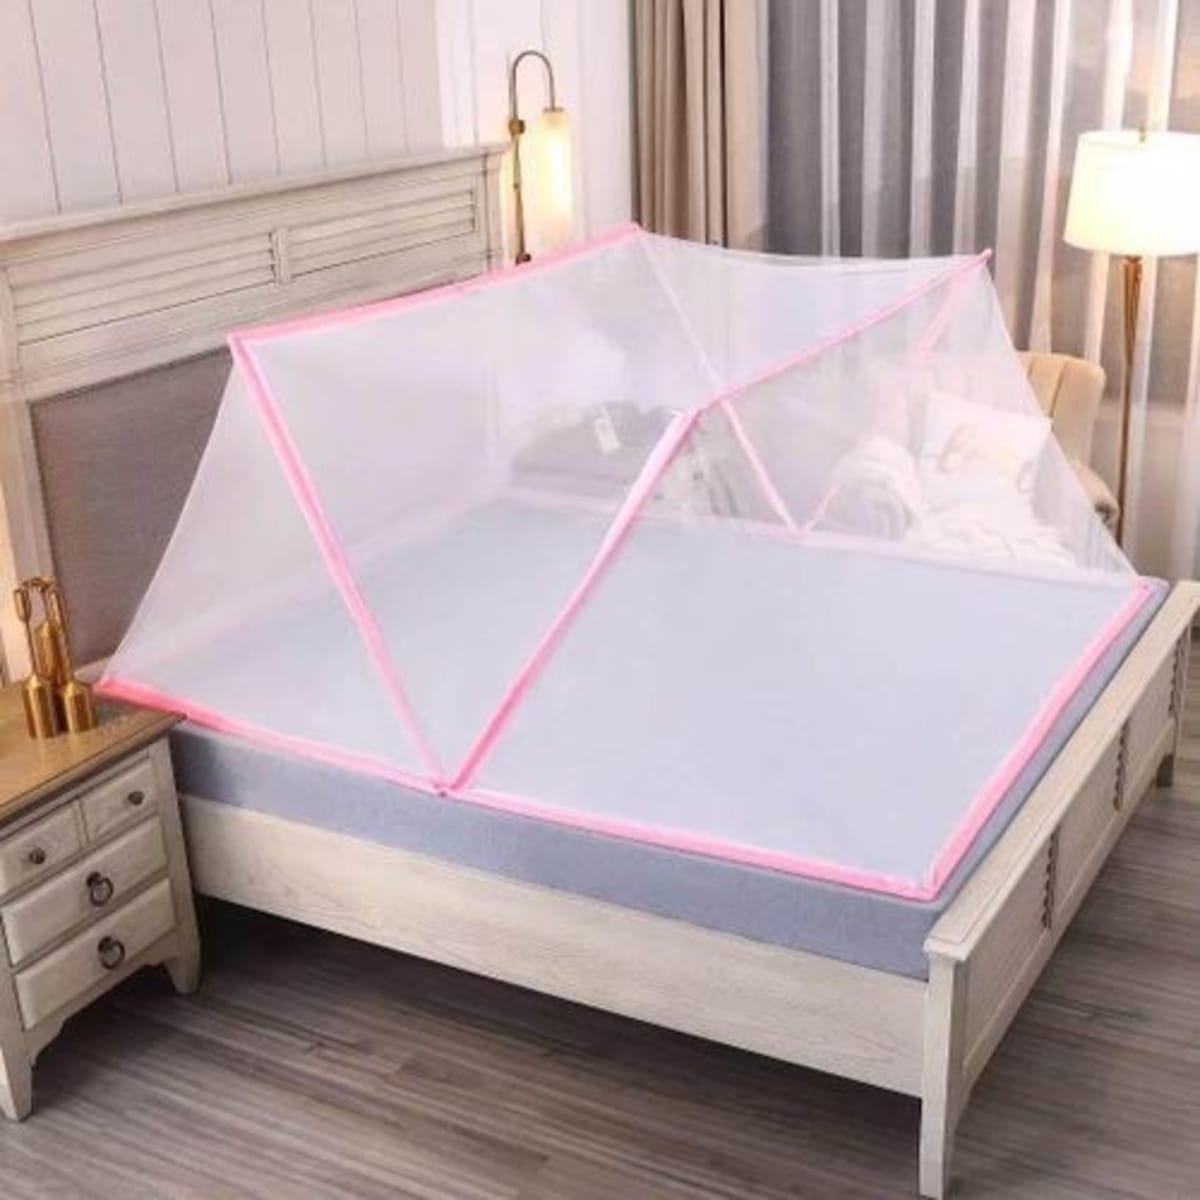 Collapsible Mosquito Net - 4ft By 6ft - Pink